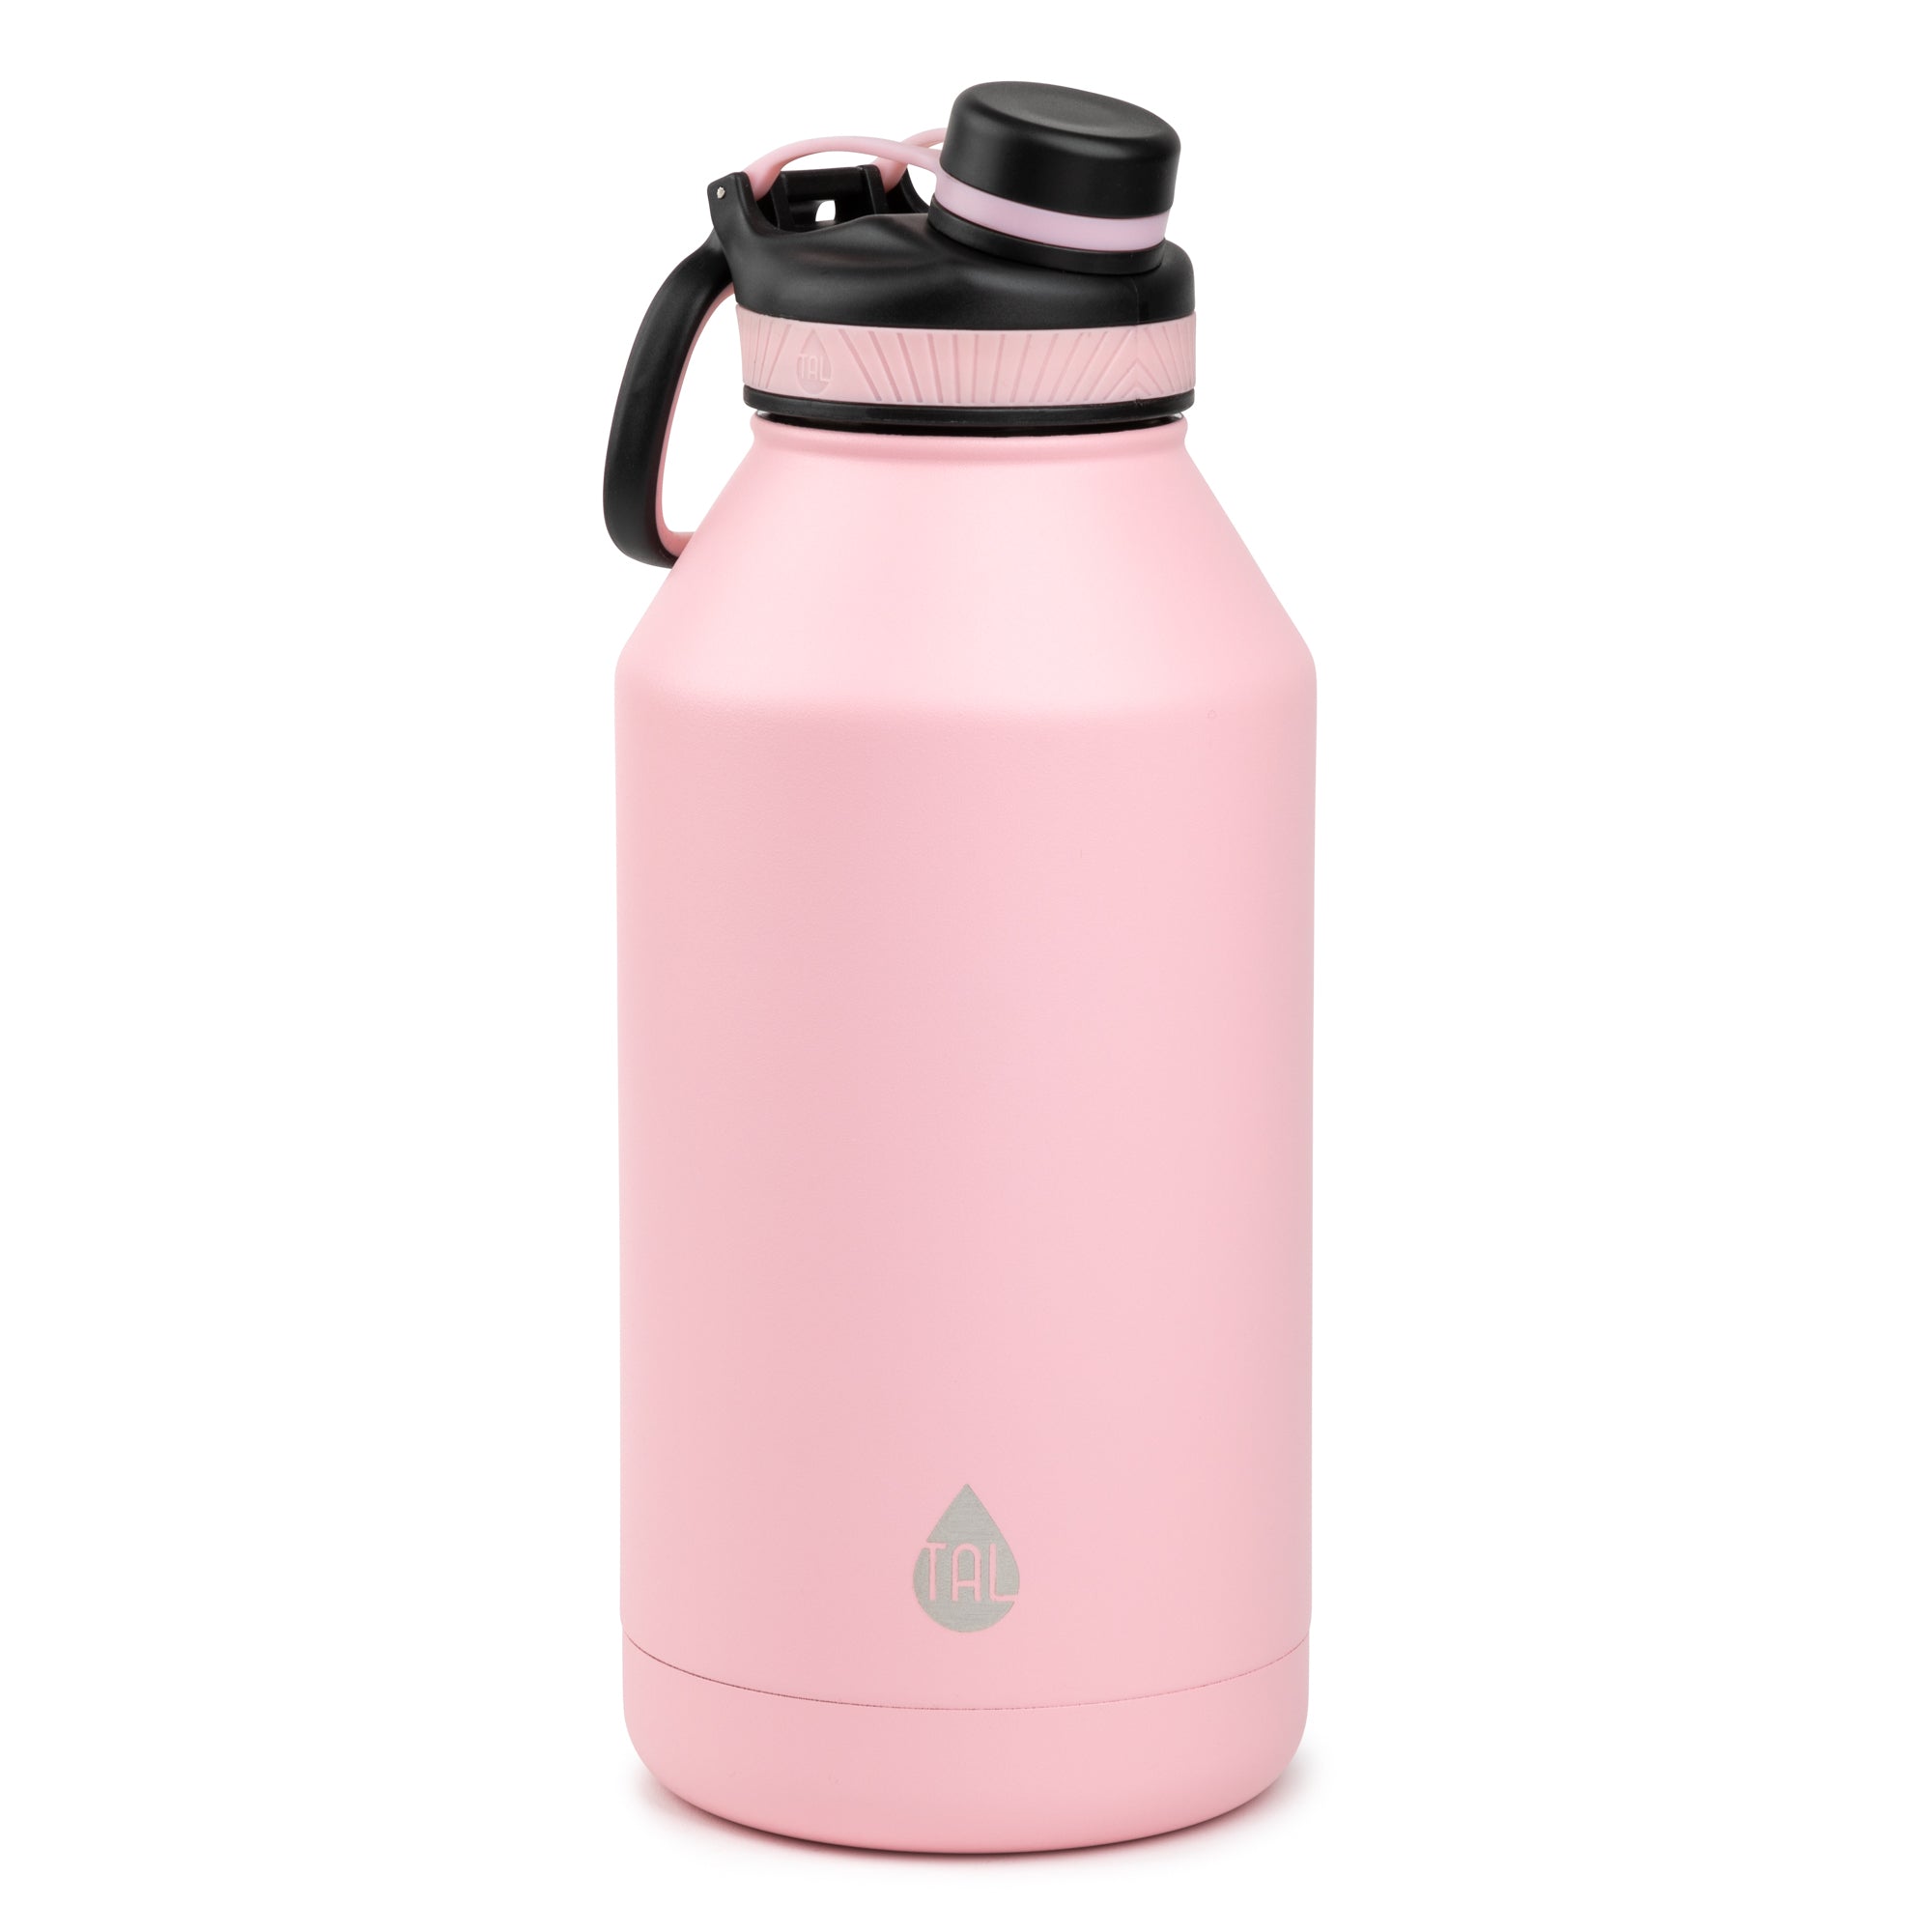 1pc Pink Time Marked Water Bottle, Transparent With Portable Strap